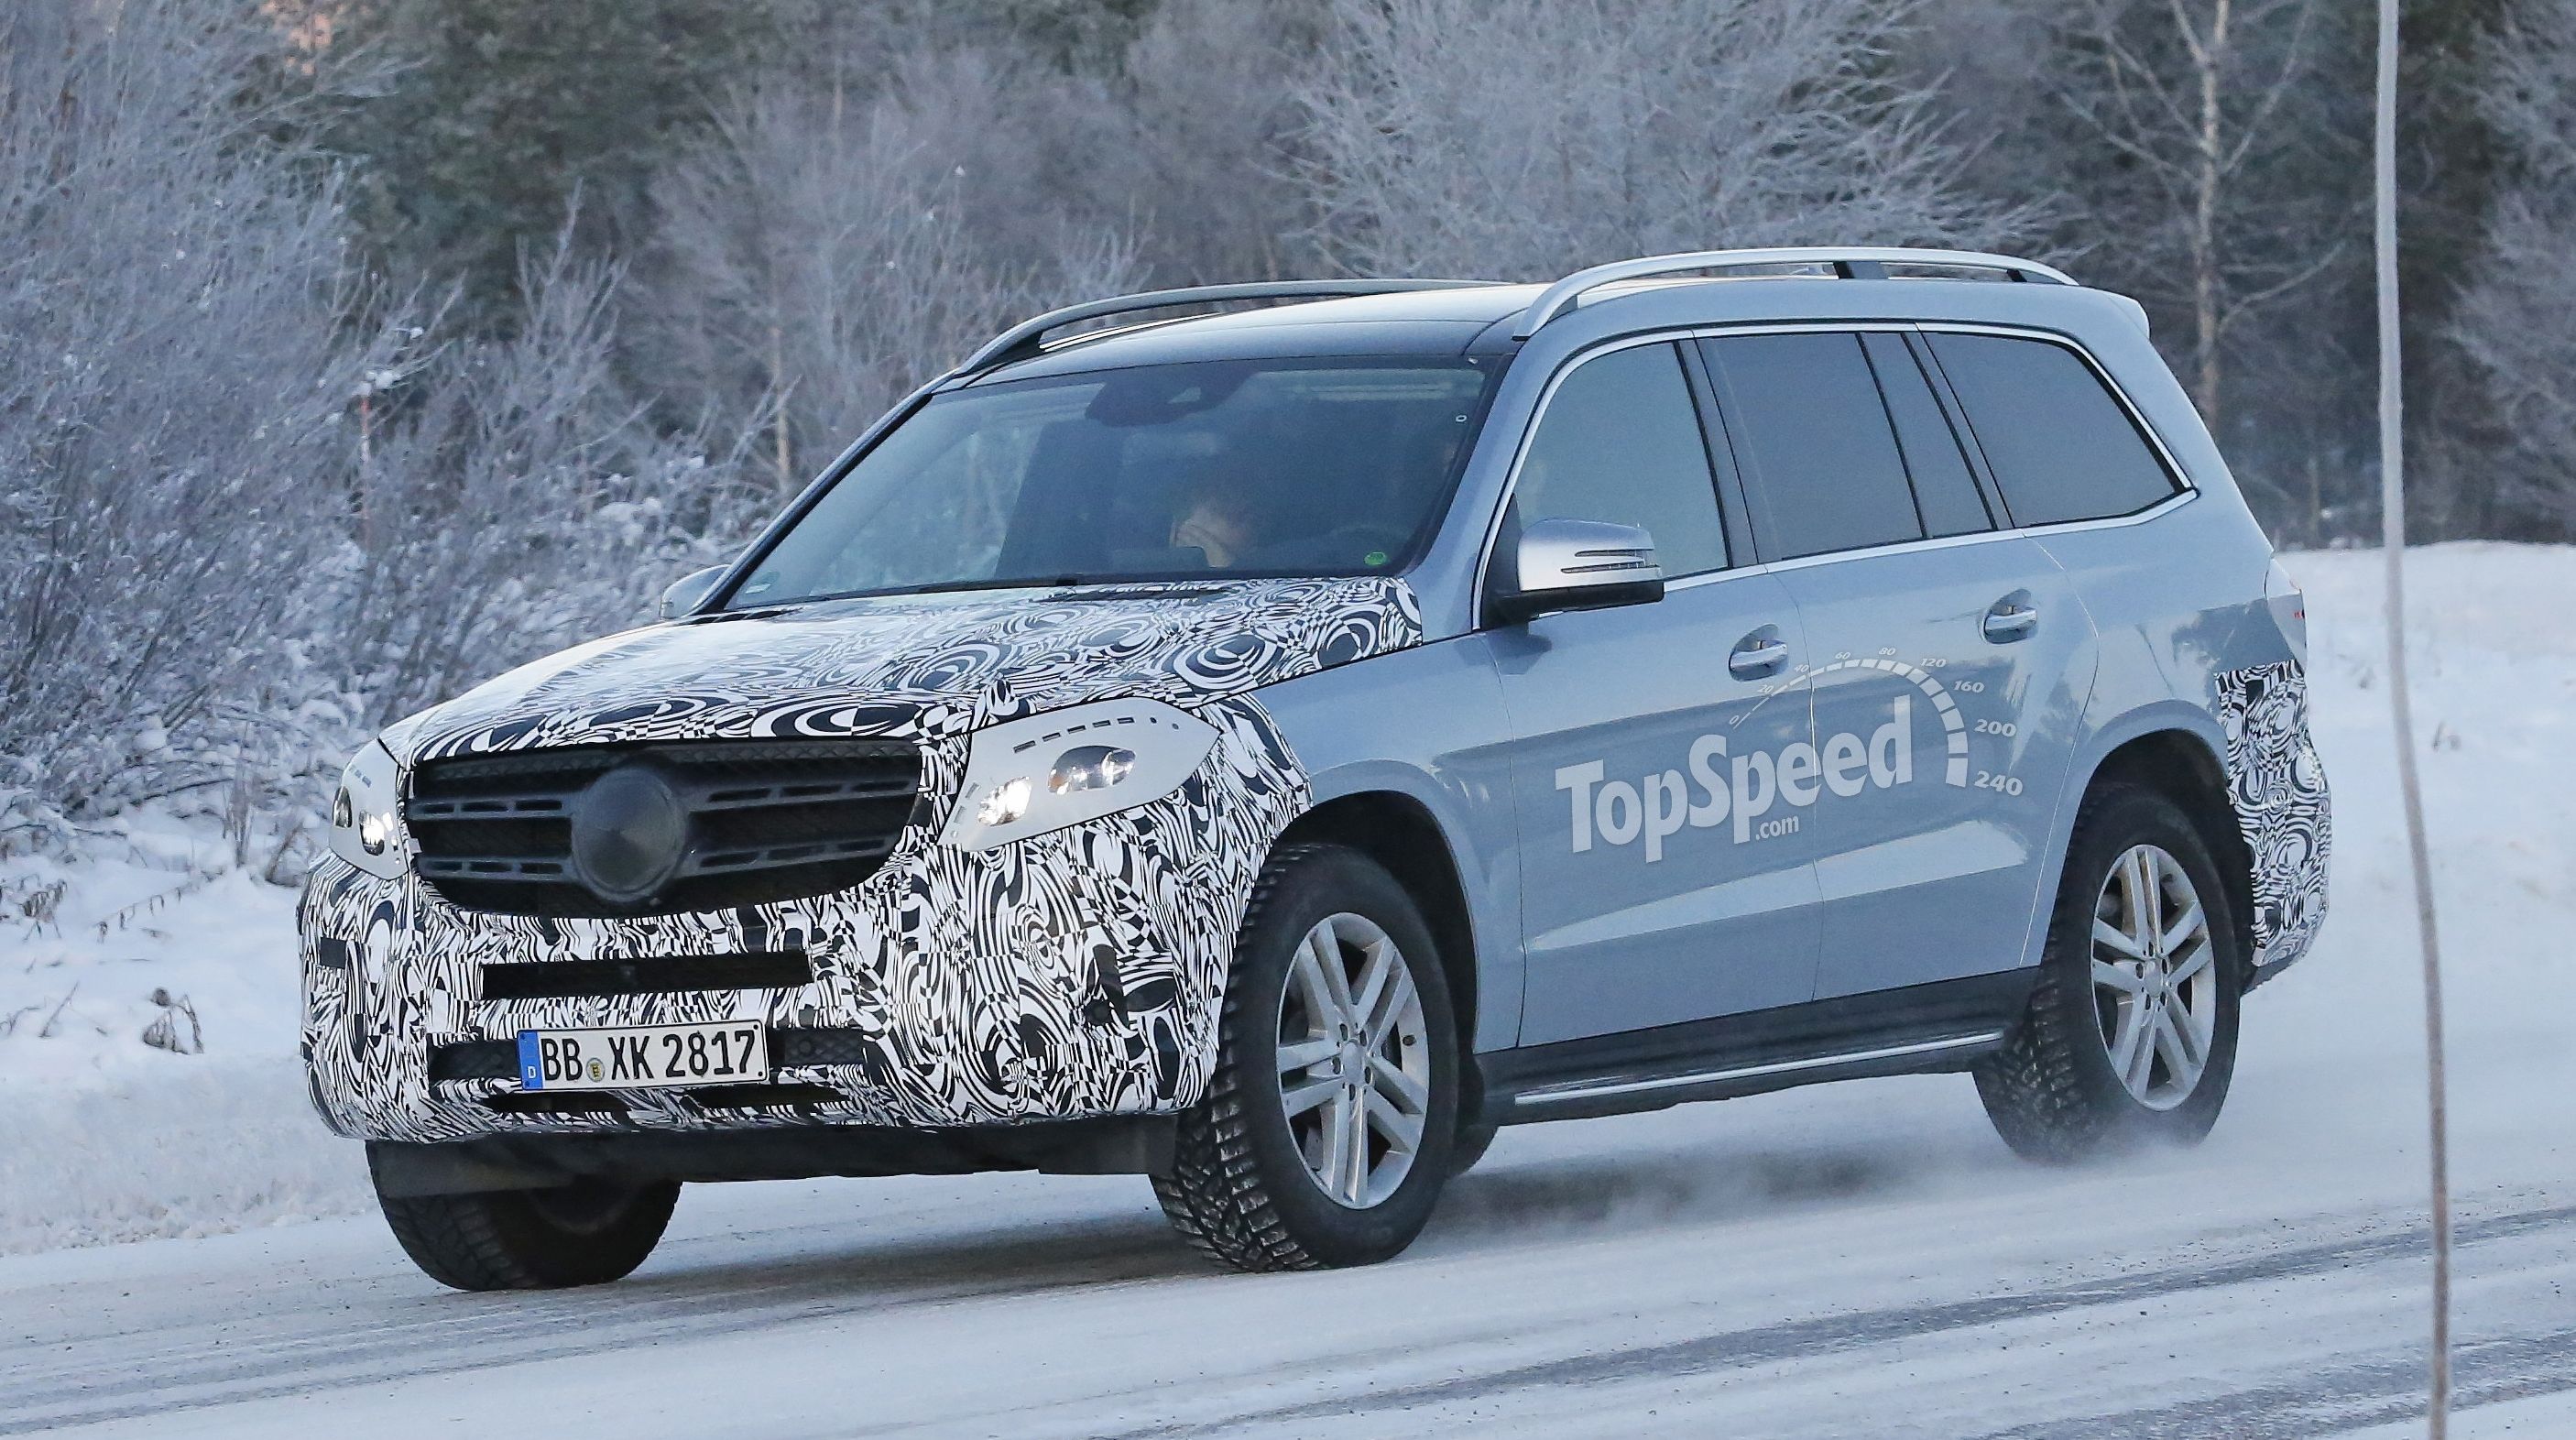  Our spy photographers caught the updated GLS out testing in the snow. Looks like we're ramping up to see it hit the show circuit any time now. 